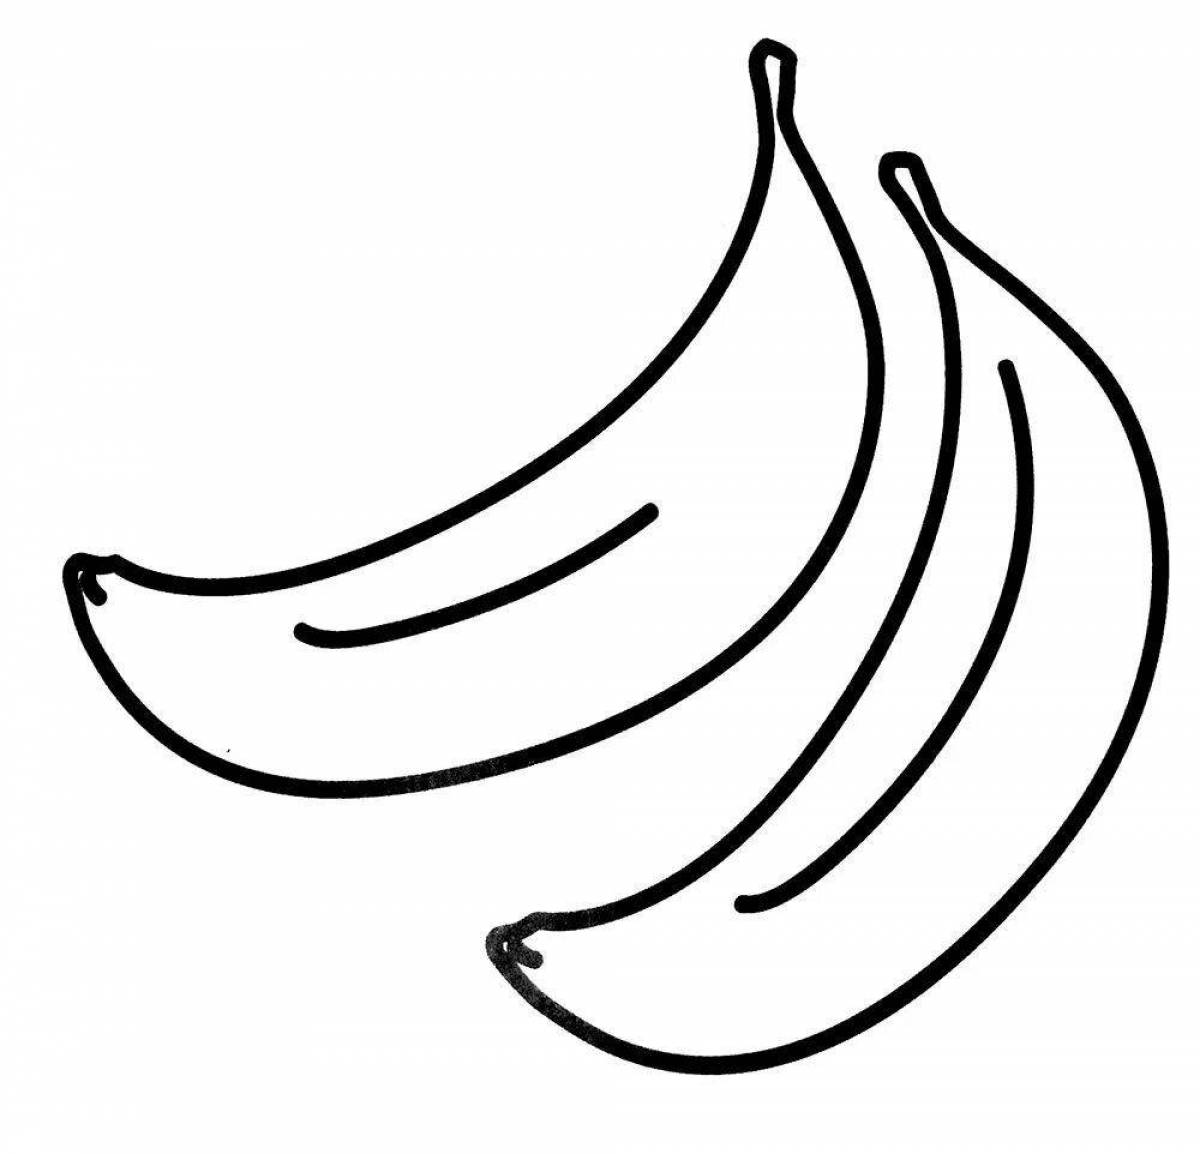 A fun banana coloring book for 3-4 year olds